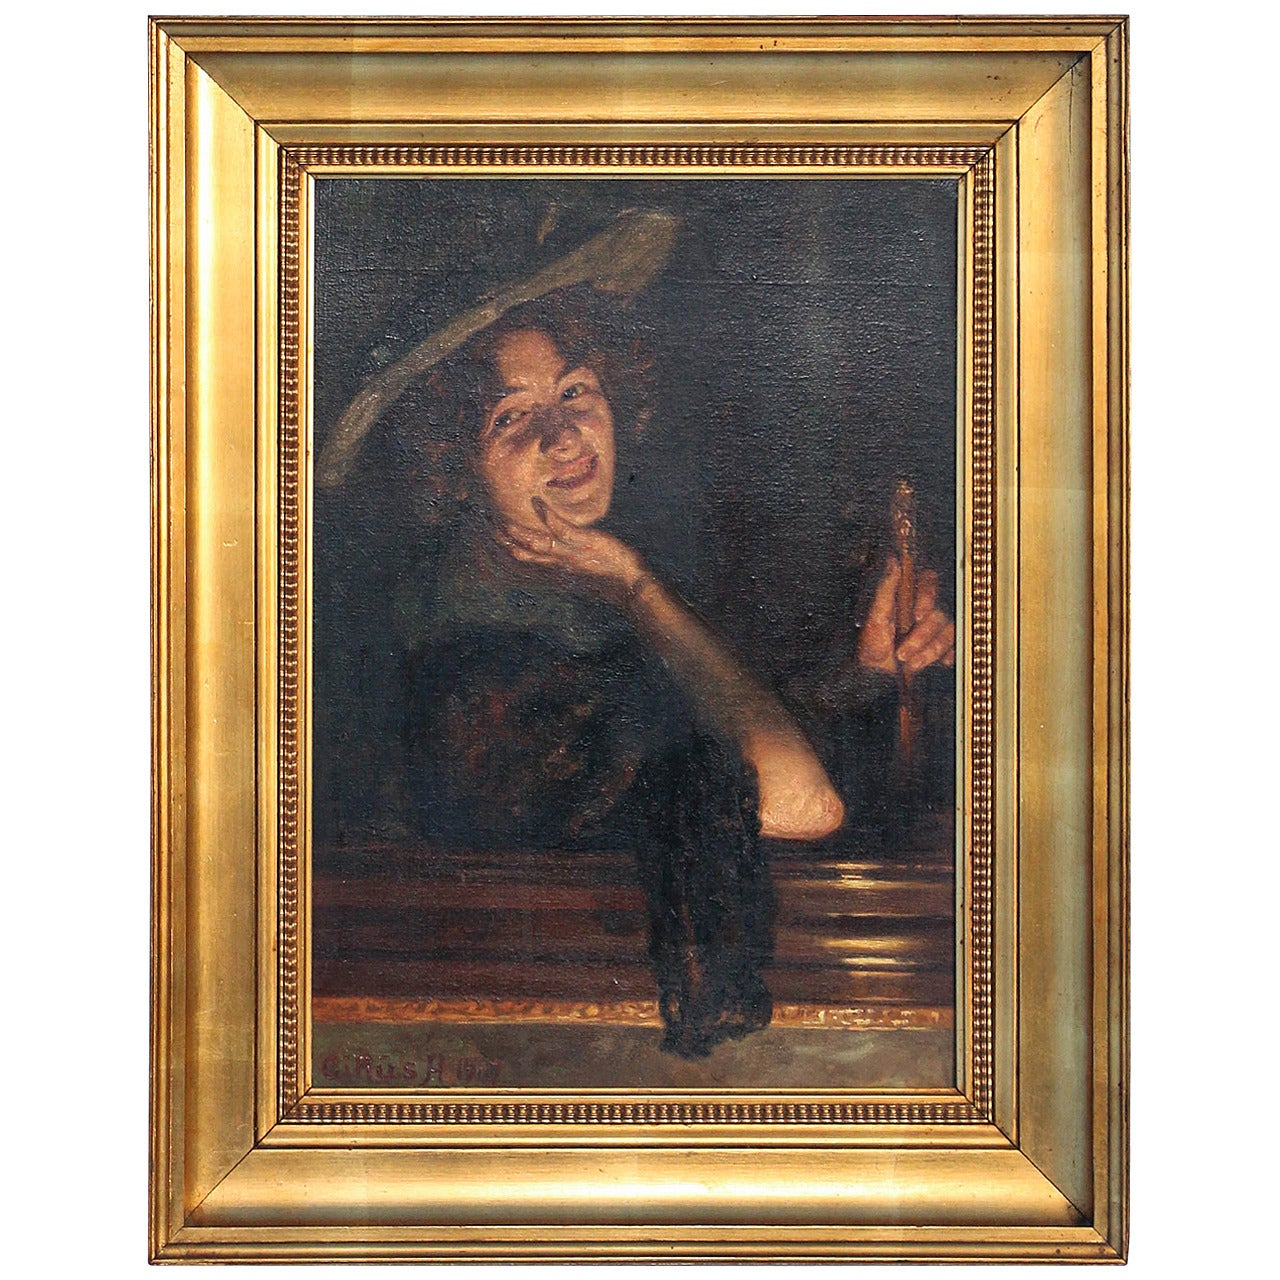 Portrait of Smiling Woman, Original Oil on Canvas Laid on Board, Signed